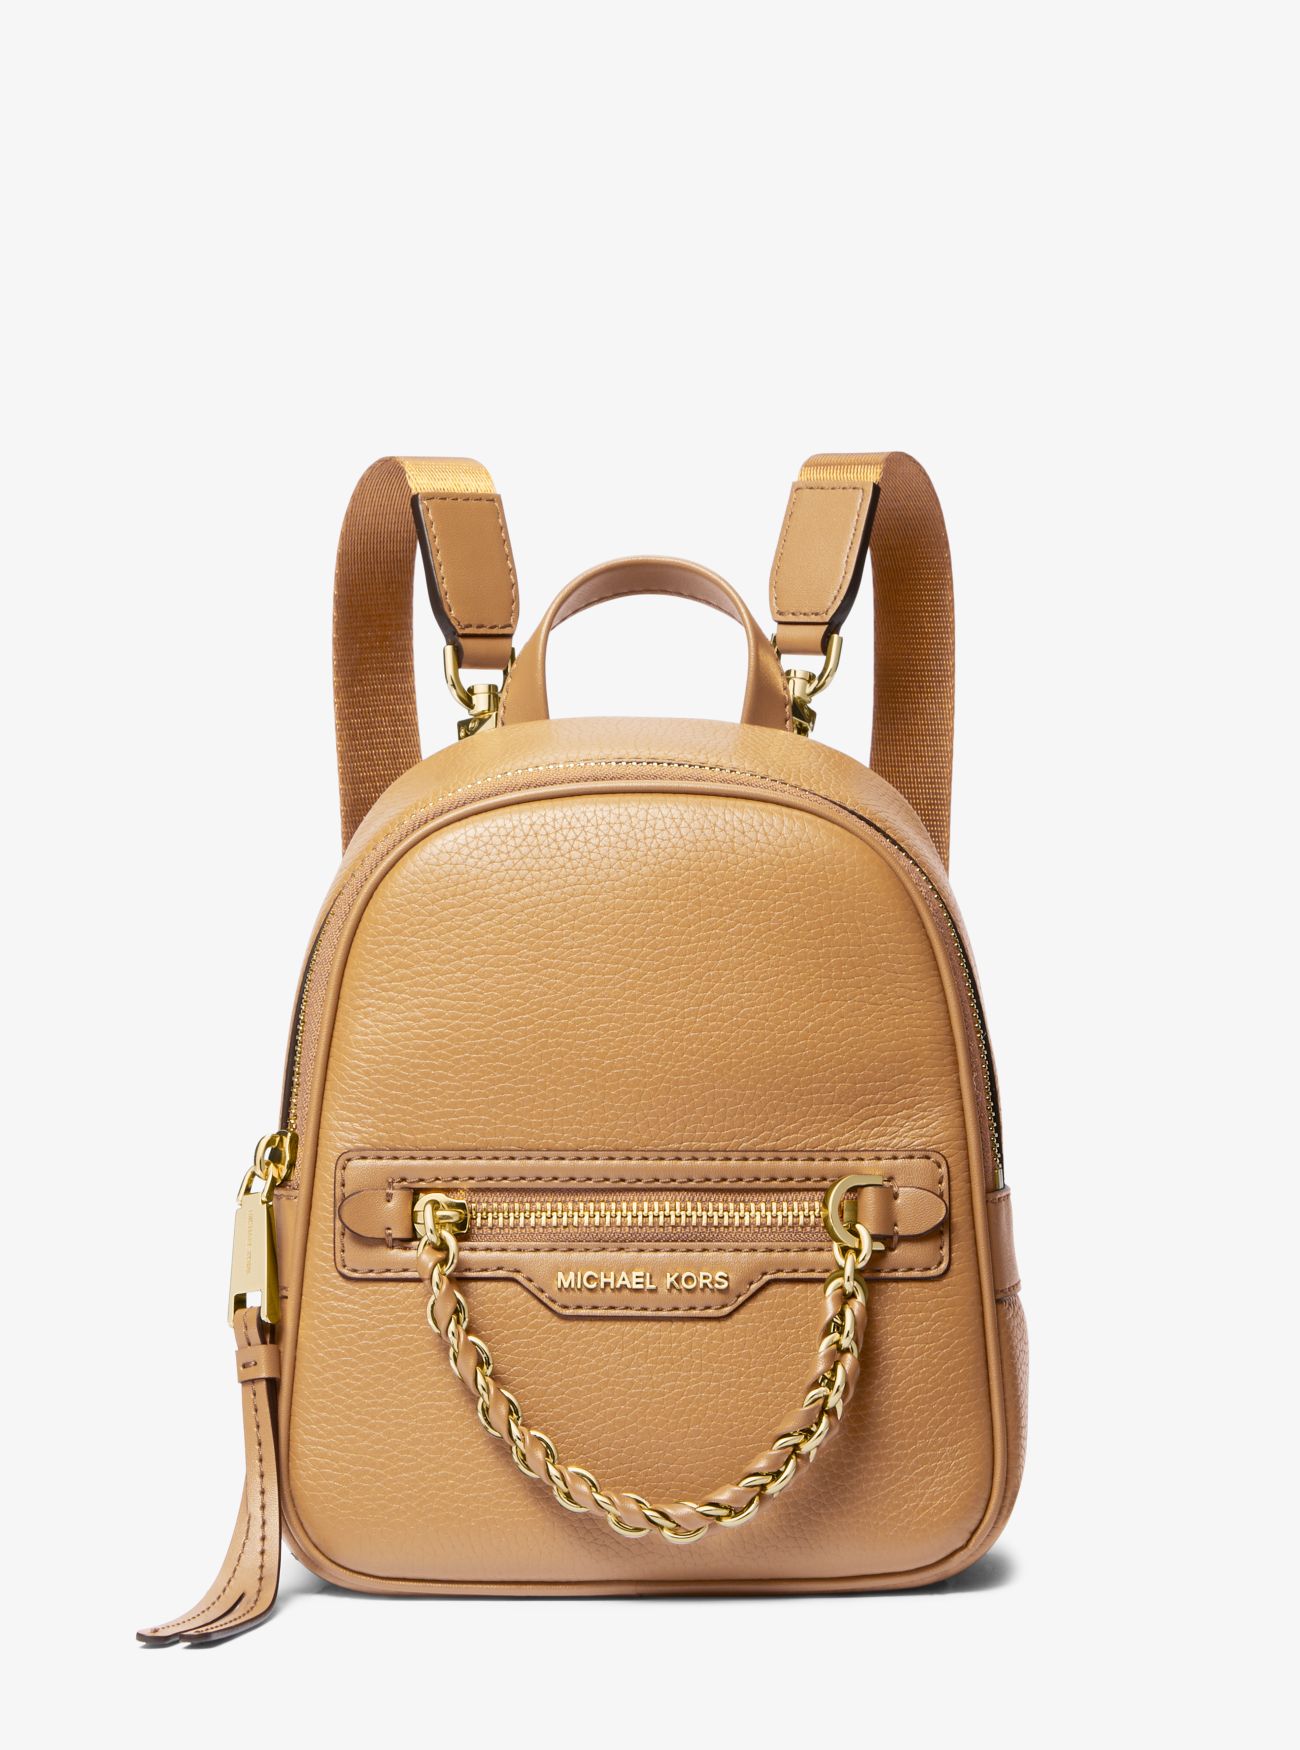 MK Elliot Extra-Small Pebbled Leather Backpack - Camel - Michael Kors